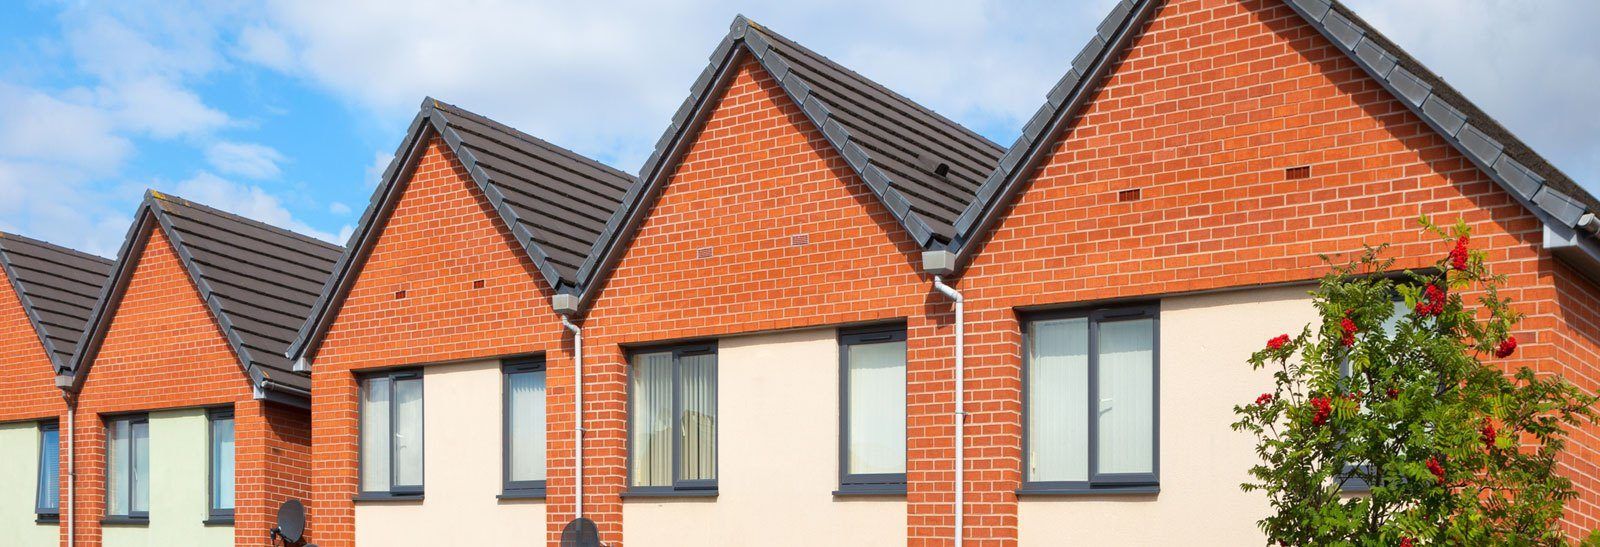 Westward provides affordable rent homes as housing report reveals 19,000 local families on waiting list in Cornwall